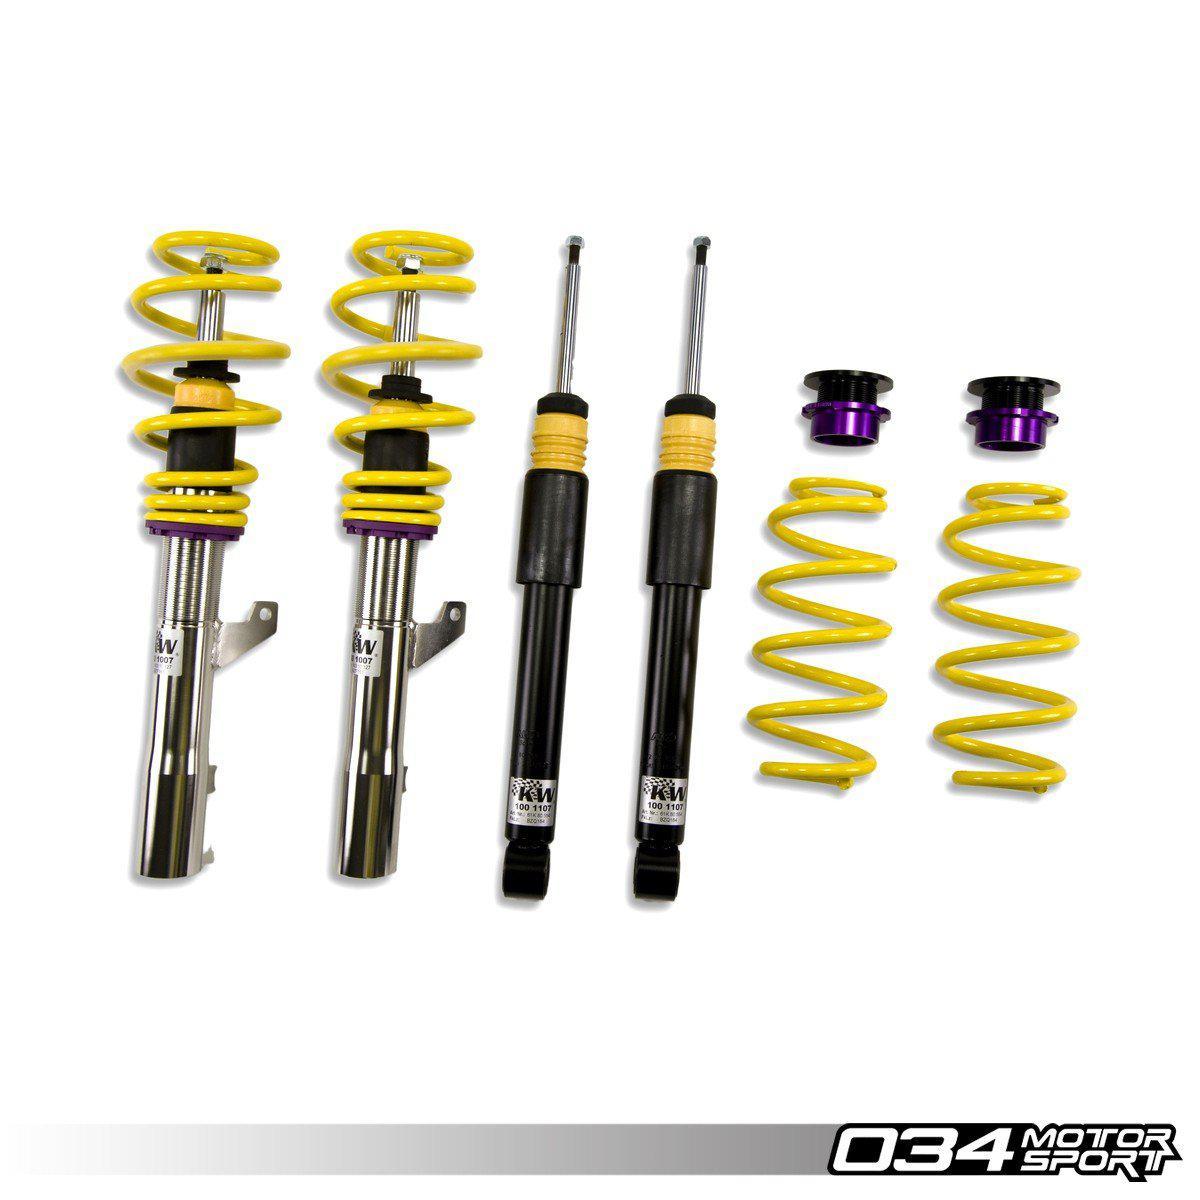 KW Variant 1 Coilover Suspension, Volkswagen Tiguan-A Little Tuning Co